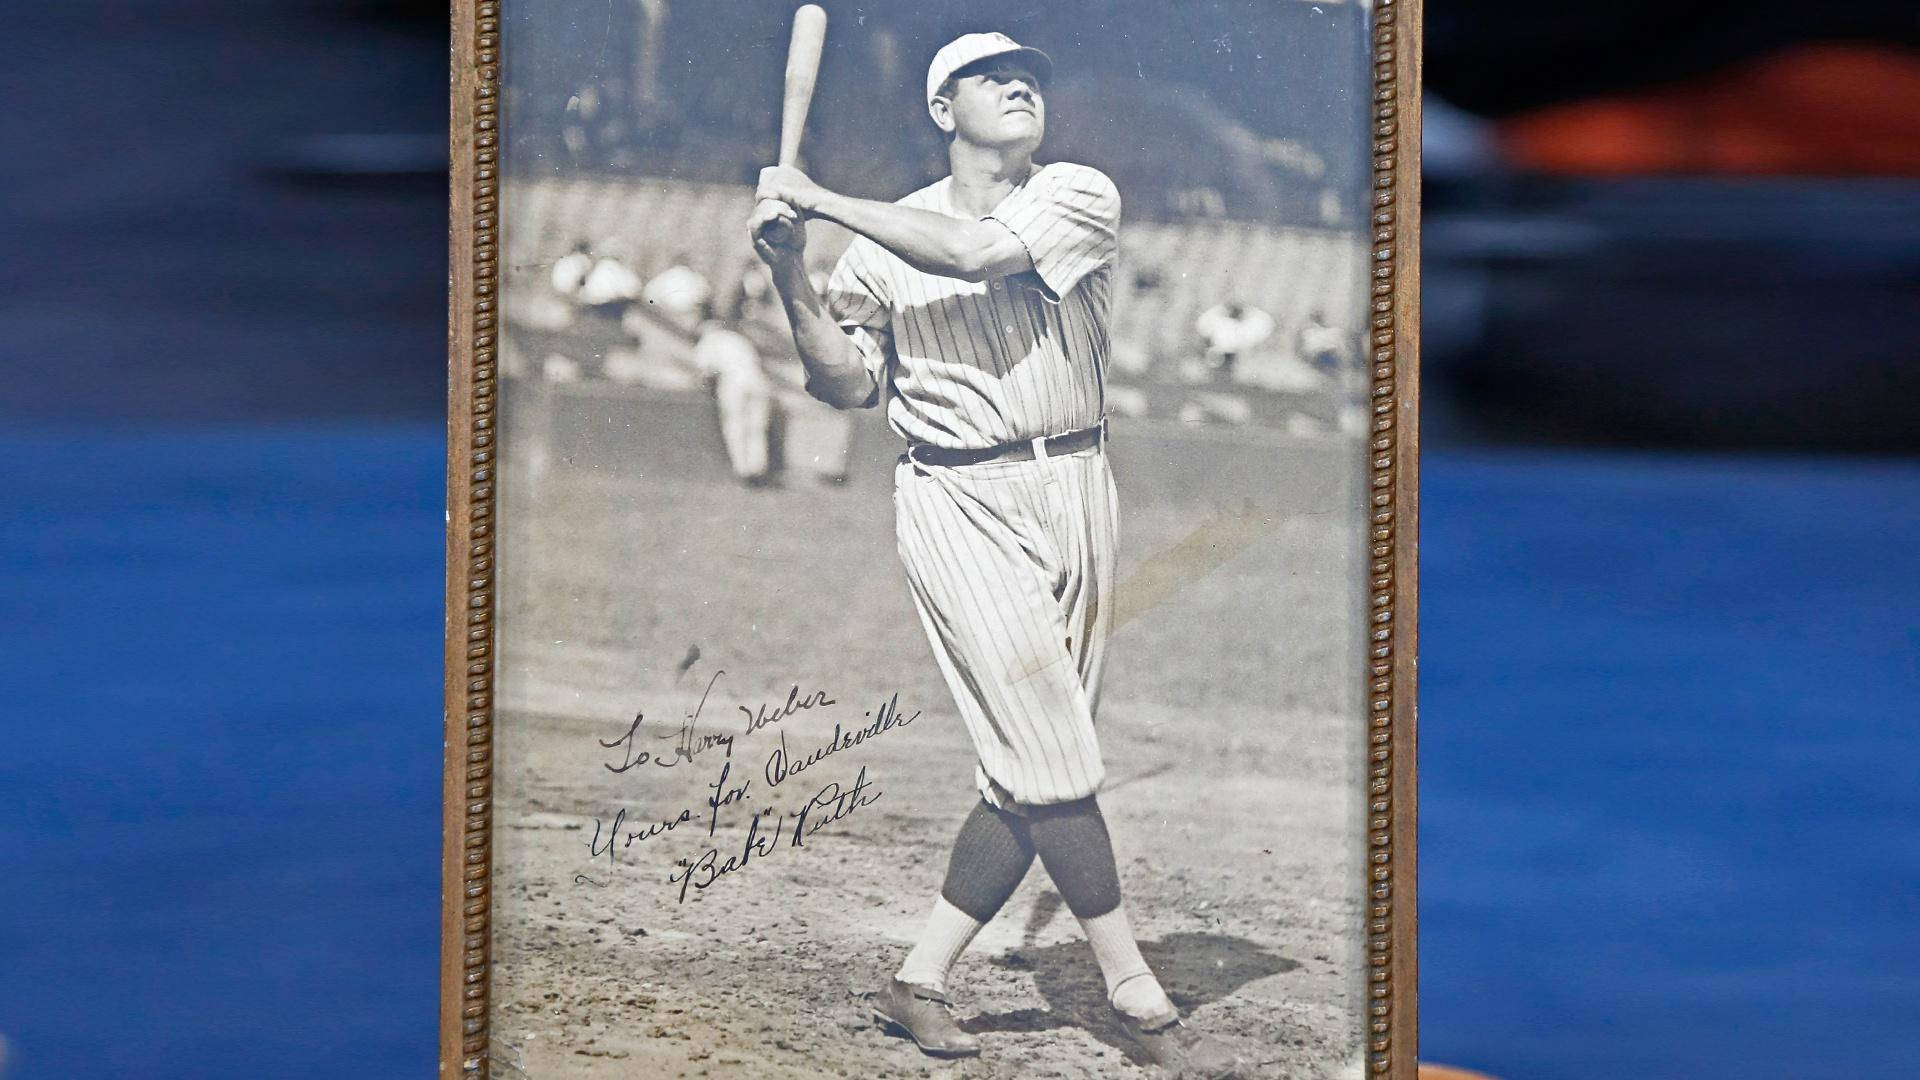 Babe Ruth Portrait With Signature